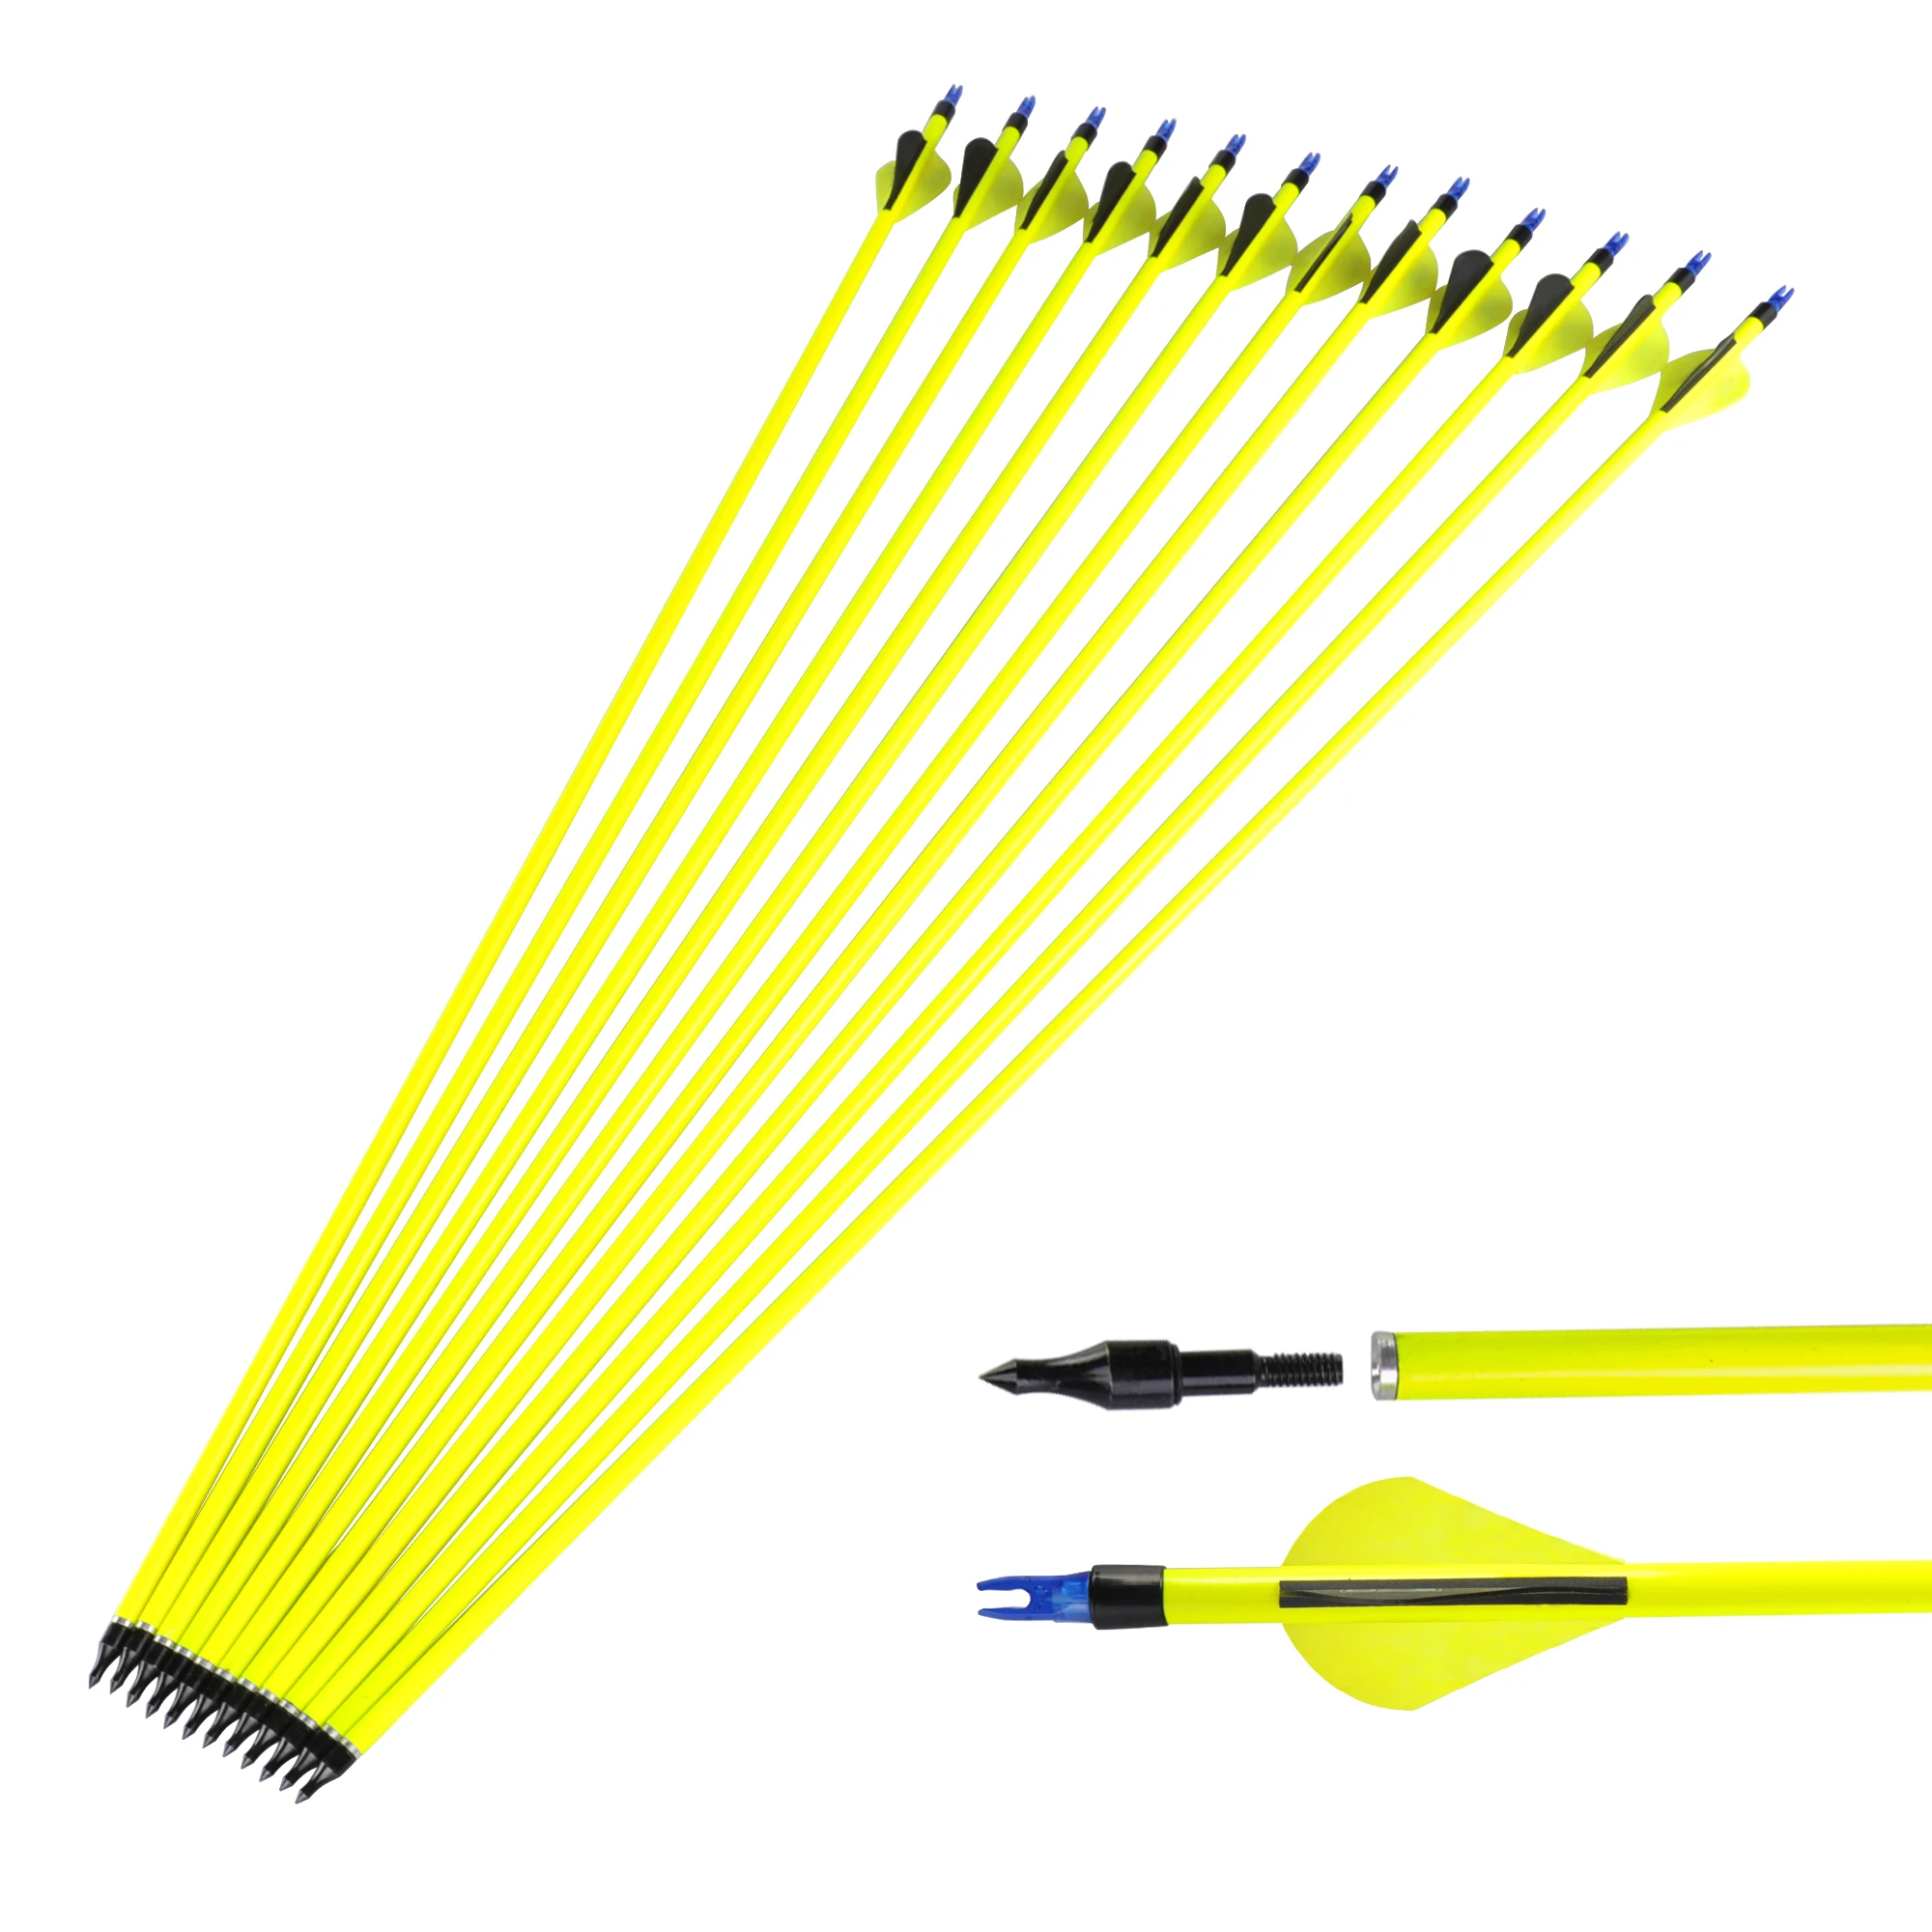 US DE 30 Inches Mixed Carbon Arrow Spine 500 Fluorescent Green Shaft for Compound Bow Archery Shooting